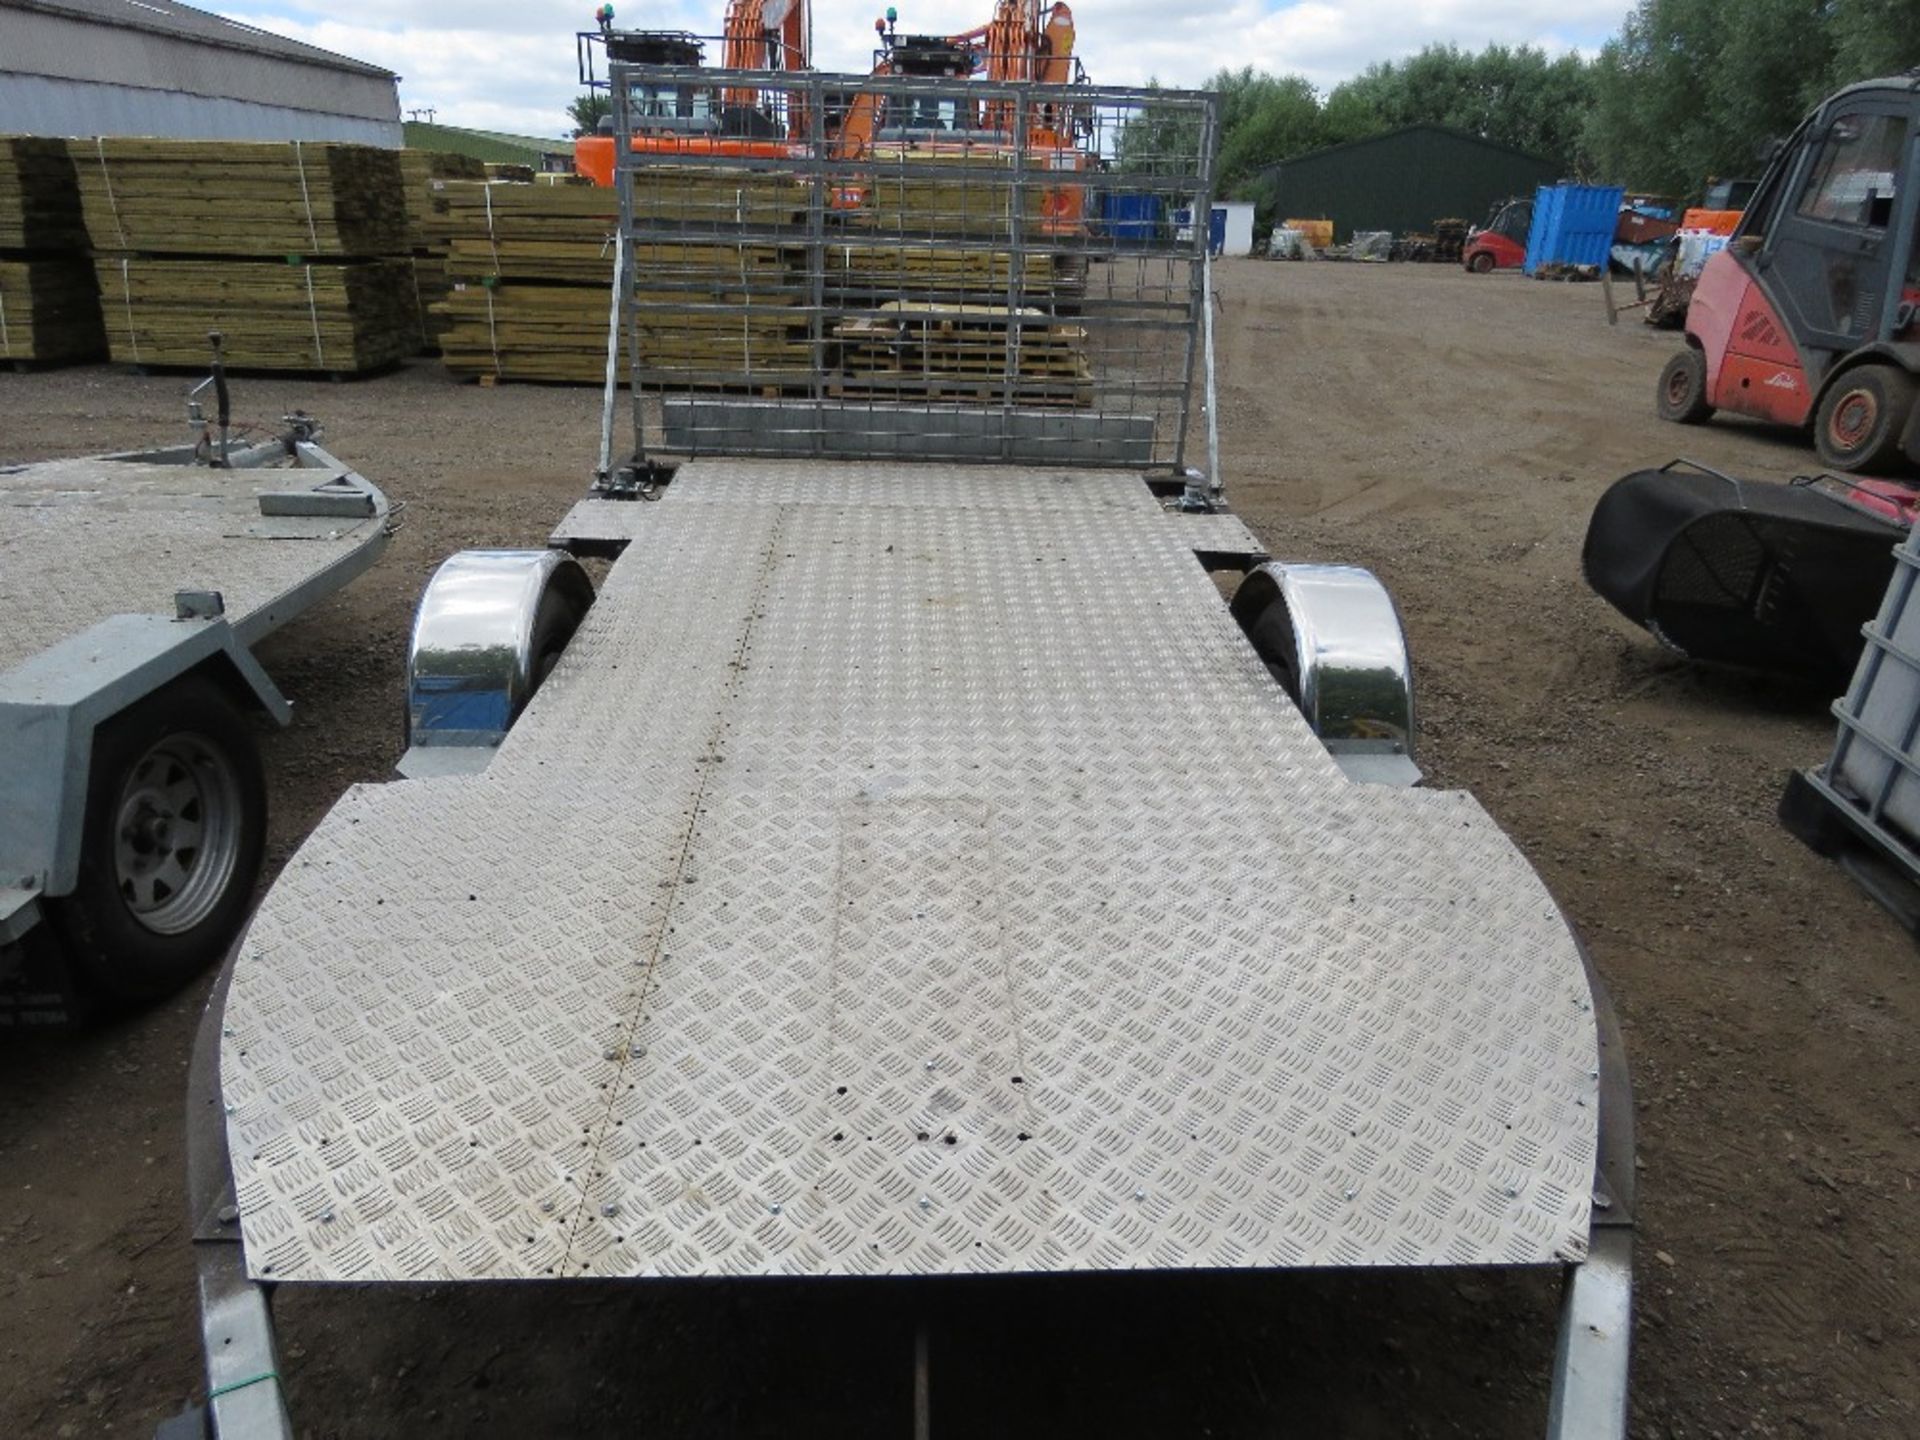 SINGLE AXLED QUAD BIKE / FLAT TRAILER 1.8M WIDE X 2.4M LENGTH BED APPROX. SOURCED FROM LIQUIDATION. - Image 5 of 6